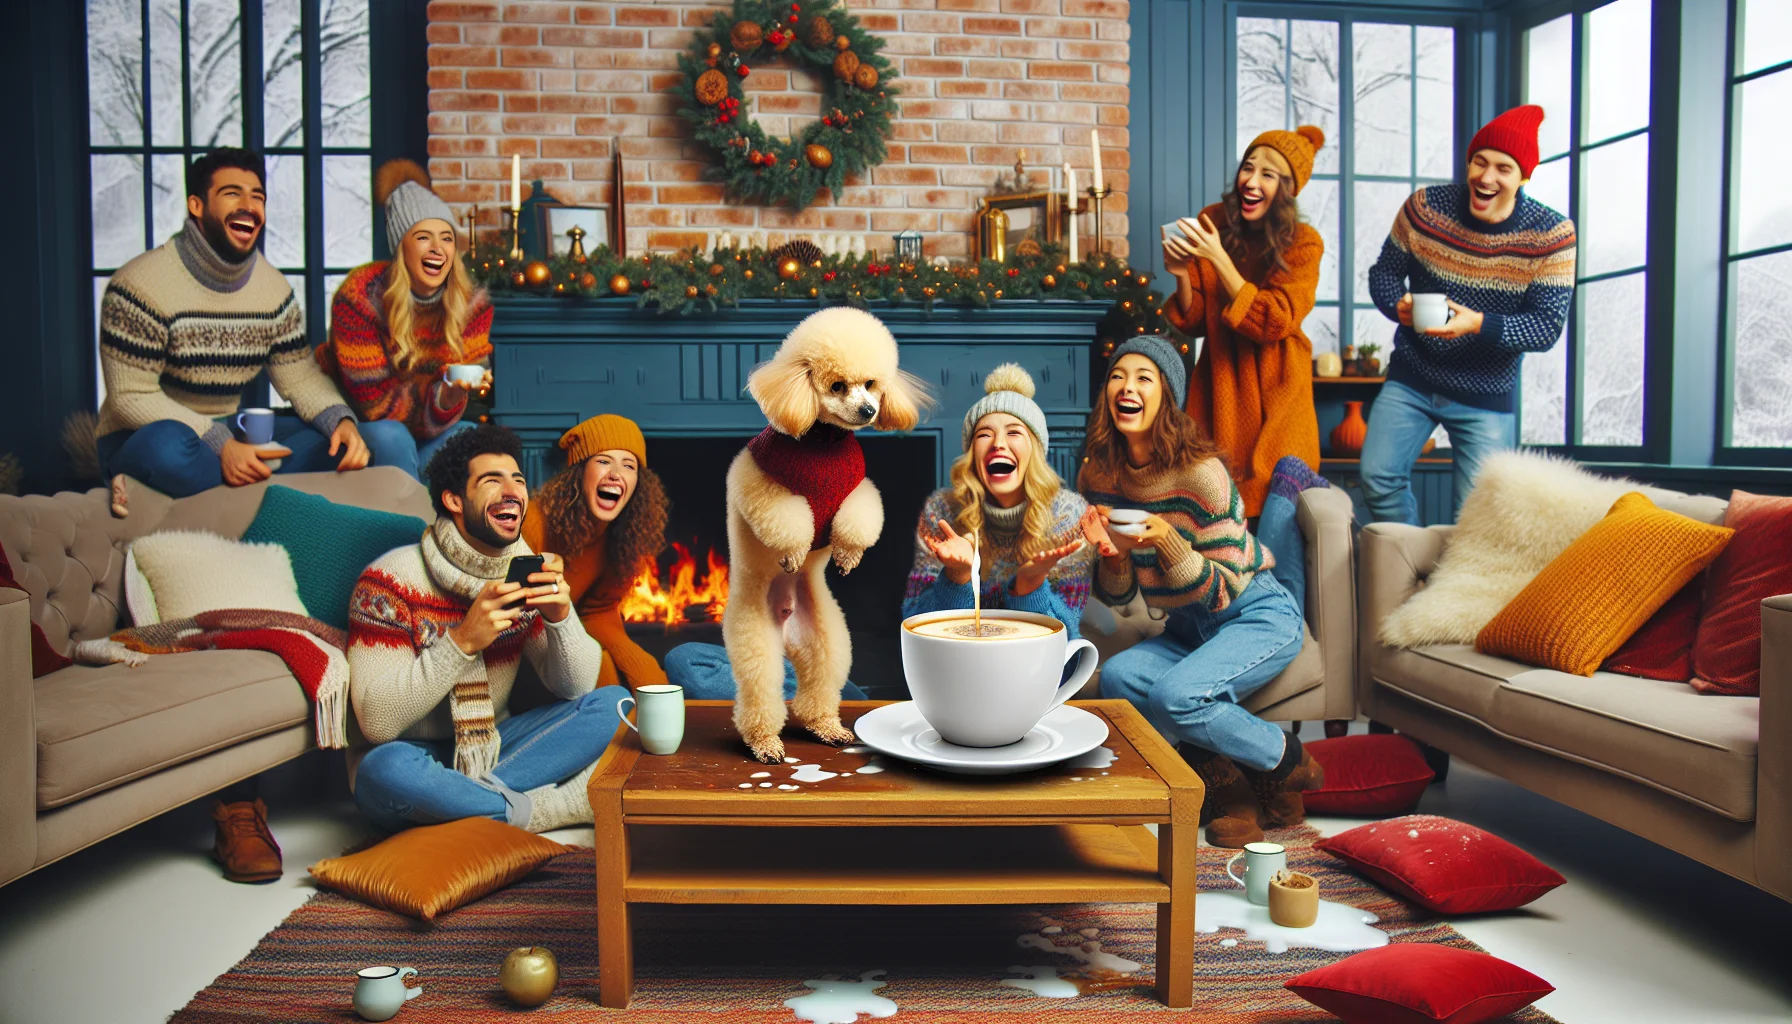 Create an amusing scene of a large living room on a cold winter day. It is well decorated with a cozy fireplace burning merrily delivering a comfortable heat. A cheeky blonde tan poodle is standing upright on hind legs on top of a coffee table trying to drink from a large cup of vanilla latte accidentally spilt on the table while people of various genders and descents relax on plush sofas laughing, pointing and taking pictures of the spectacle. They are all warmly dressed in colorful winter attire, their faces lit up with laughter and joy, enjoying the surprising and funny moment.